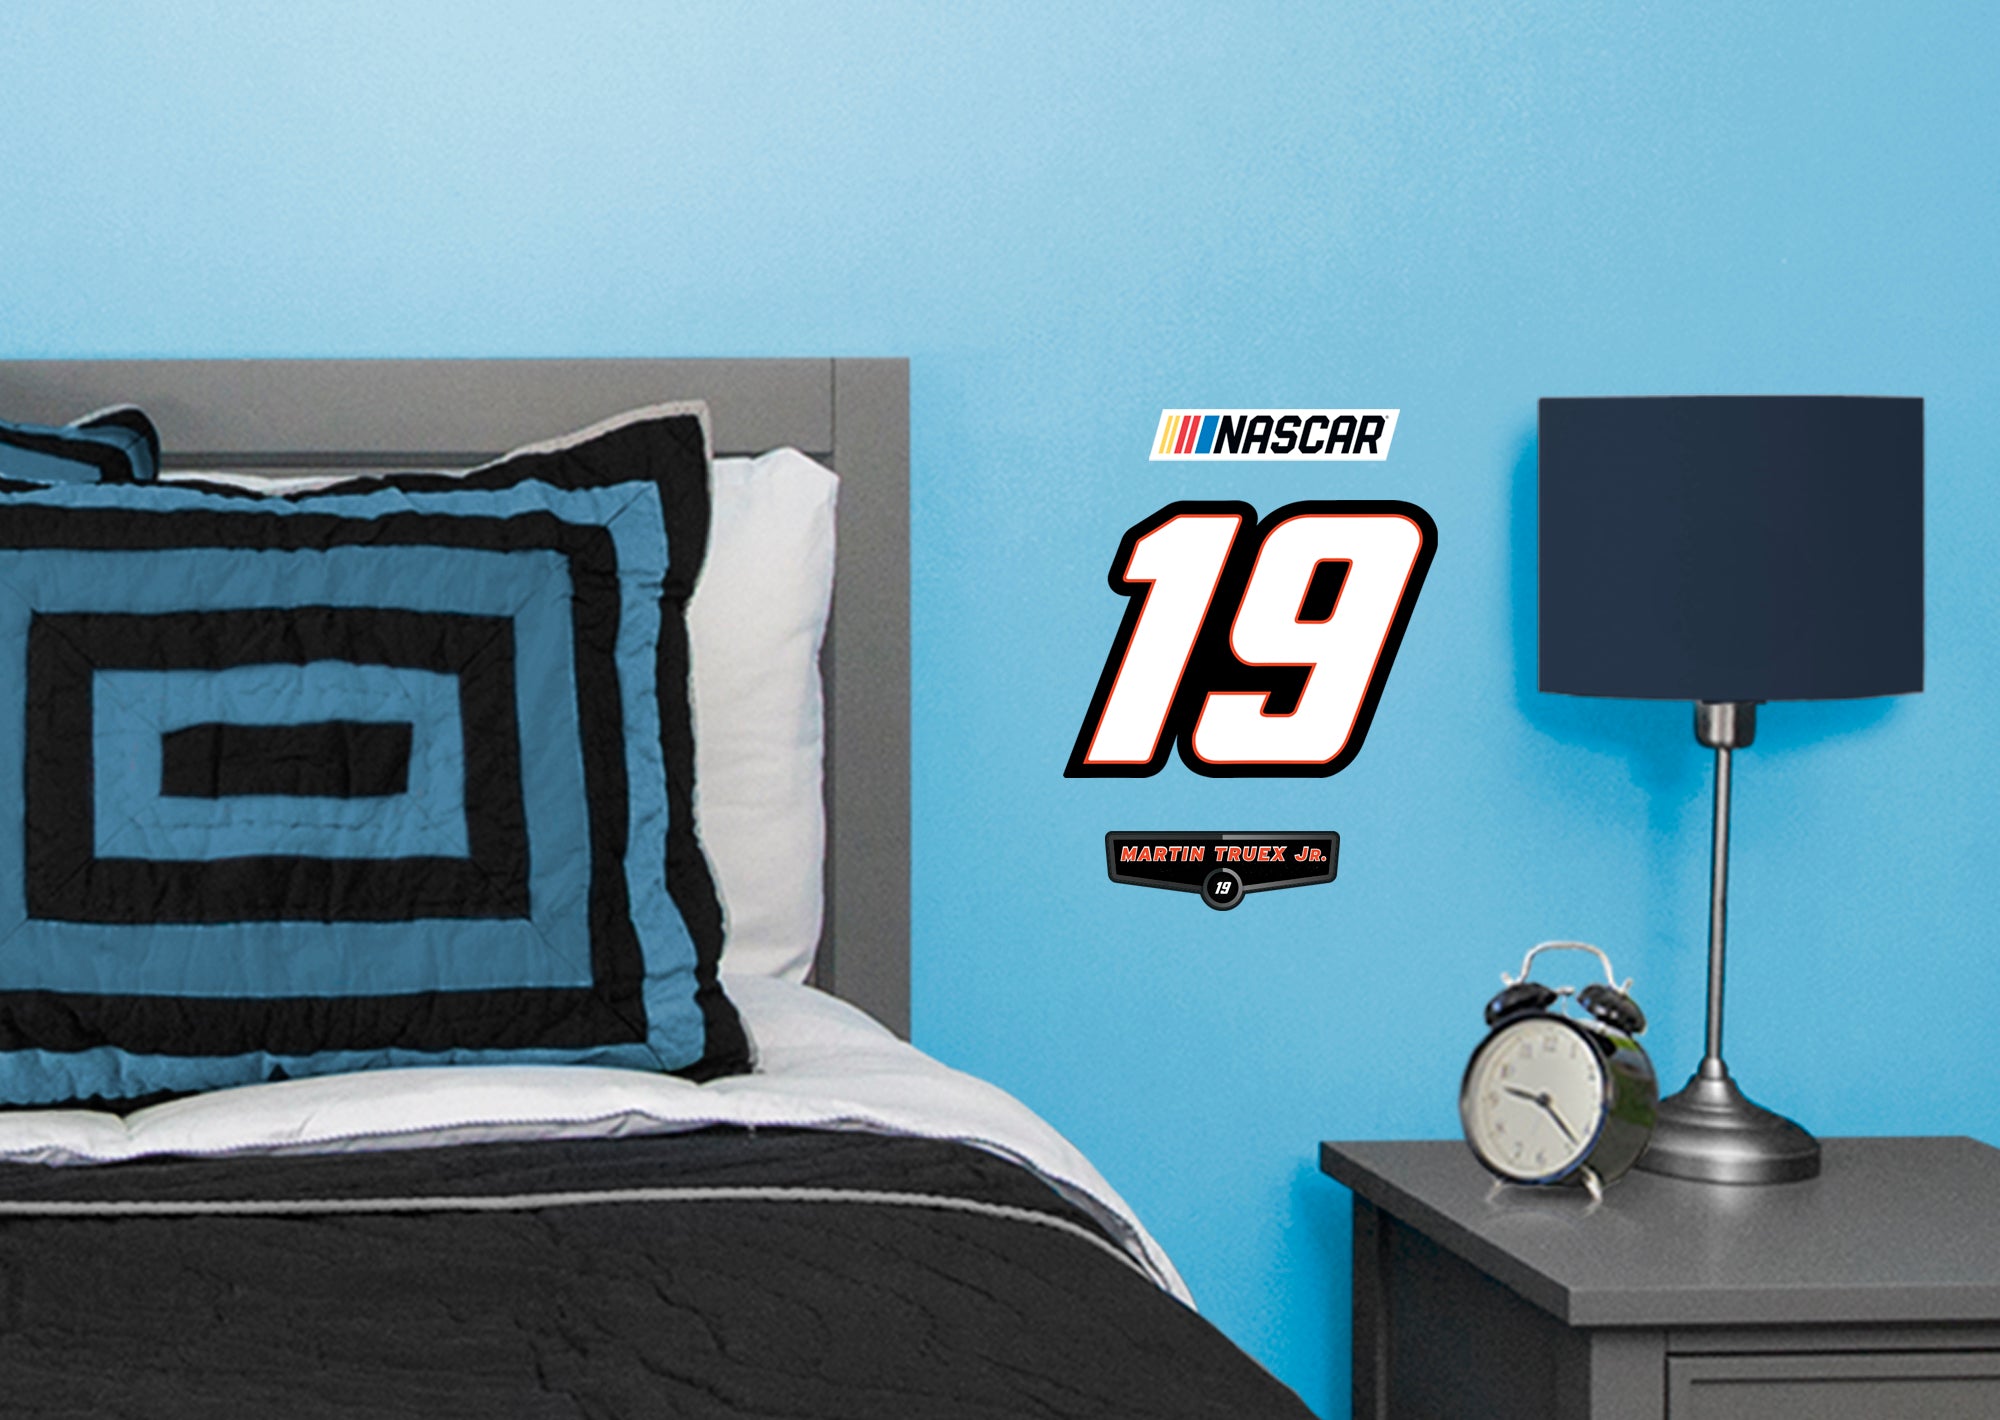 Martin Truex Jr. 2021 #19 Logo - Officially Licensed NASCAR Removable Wall Decal Large by Fathead | Vinyl